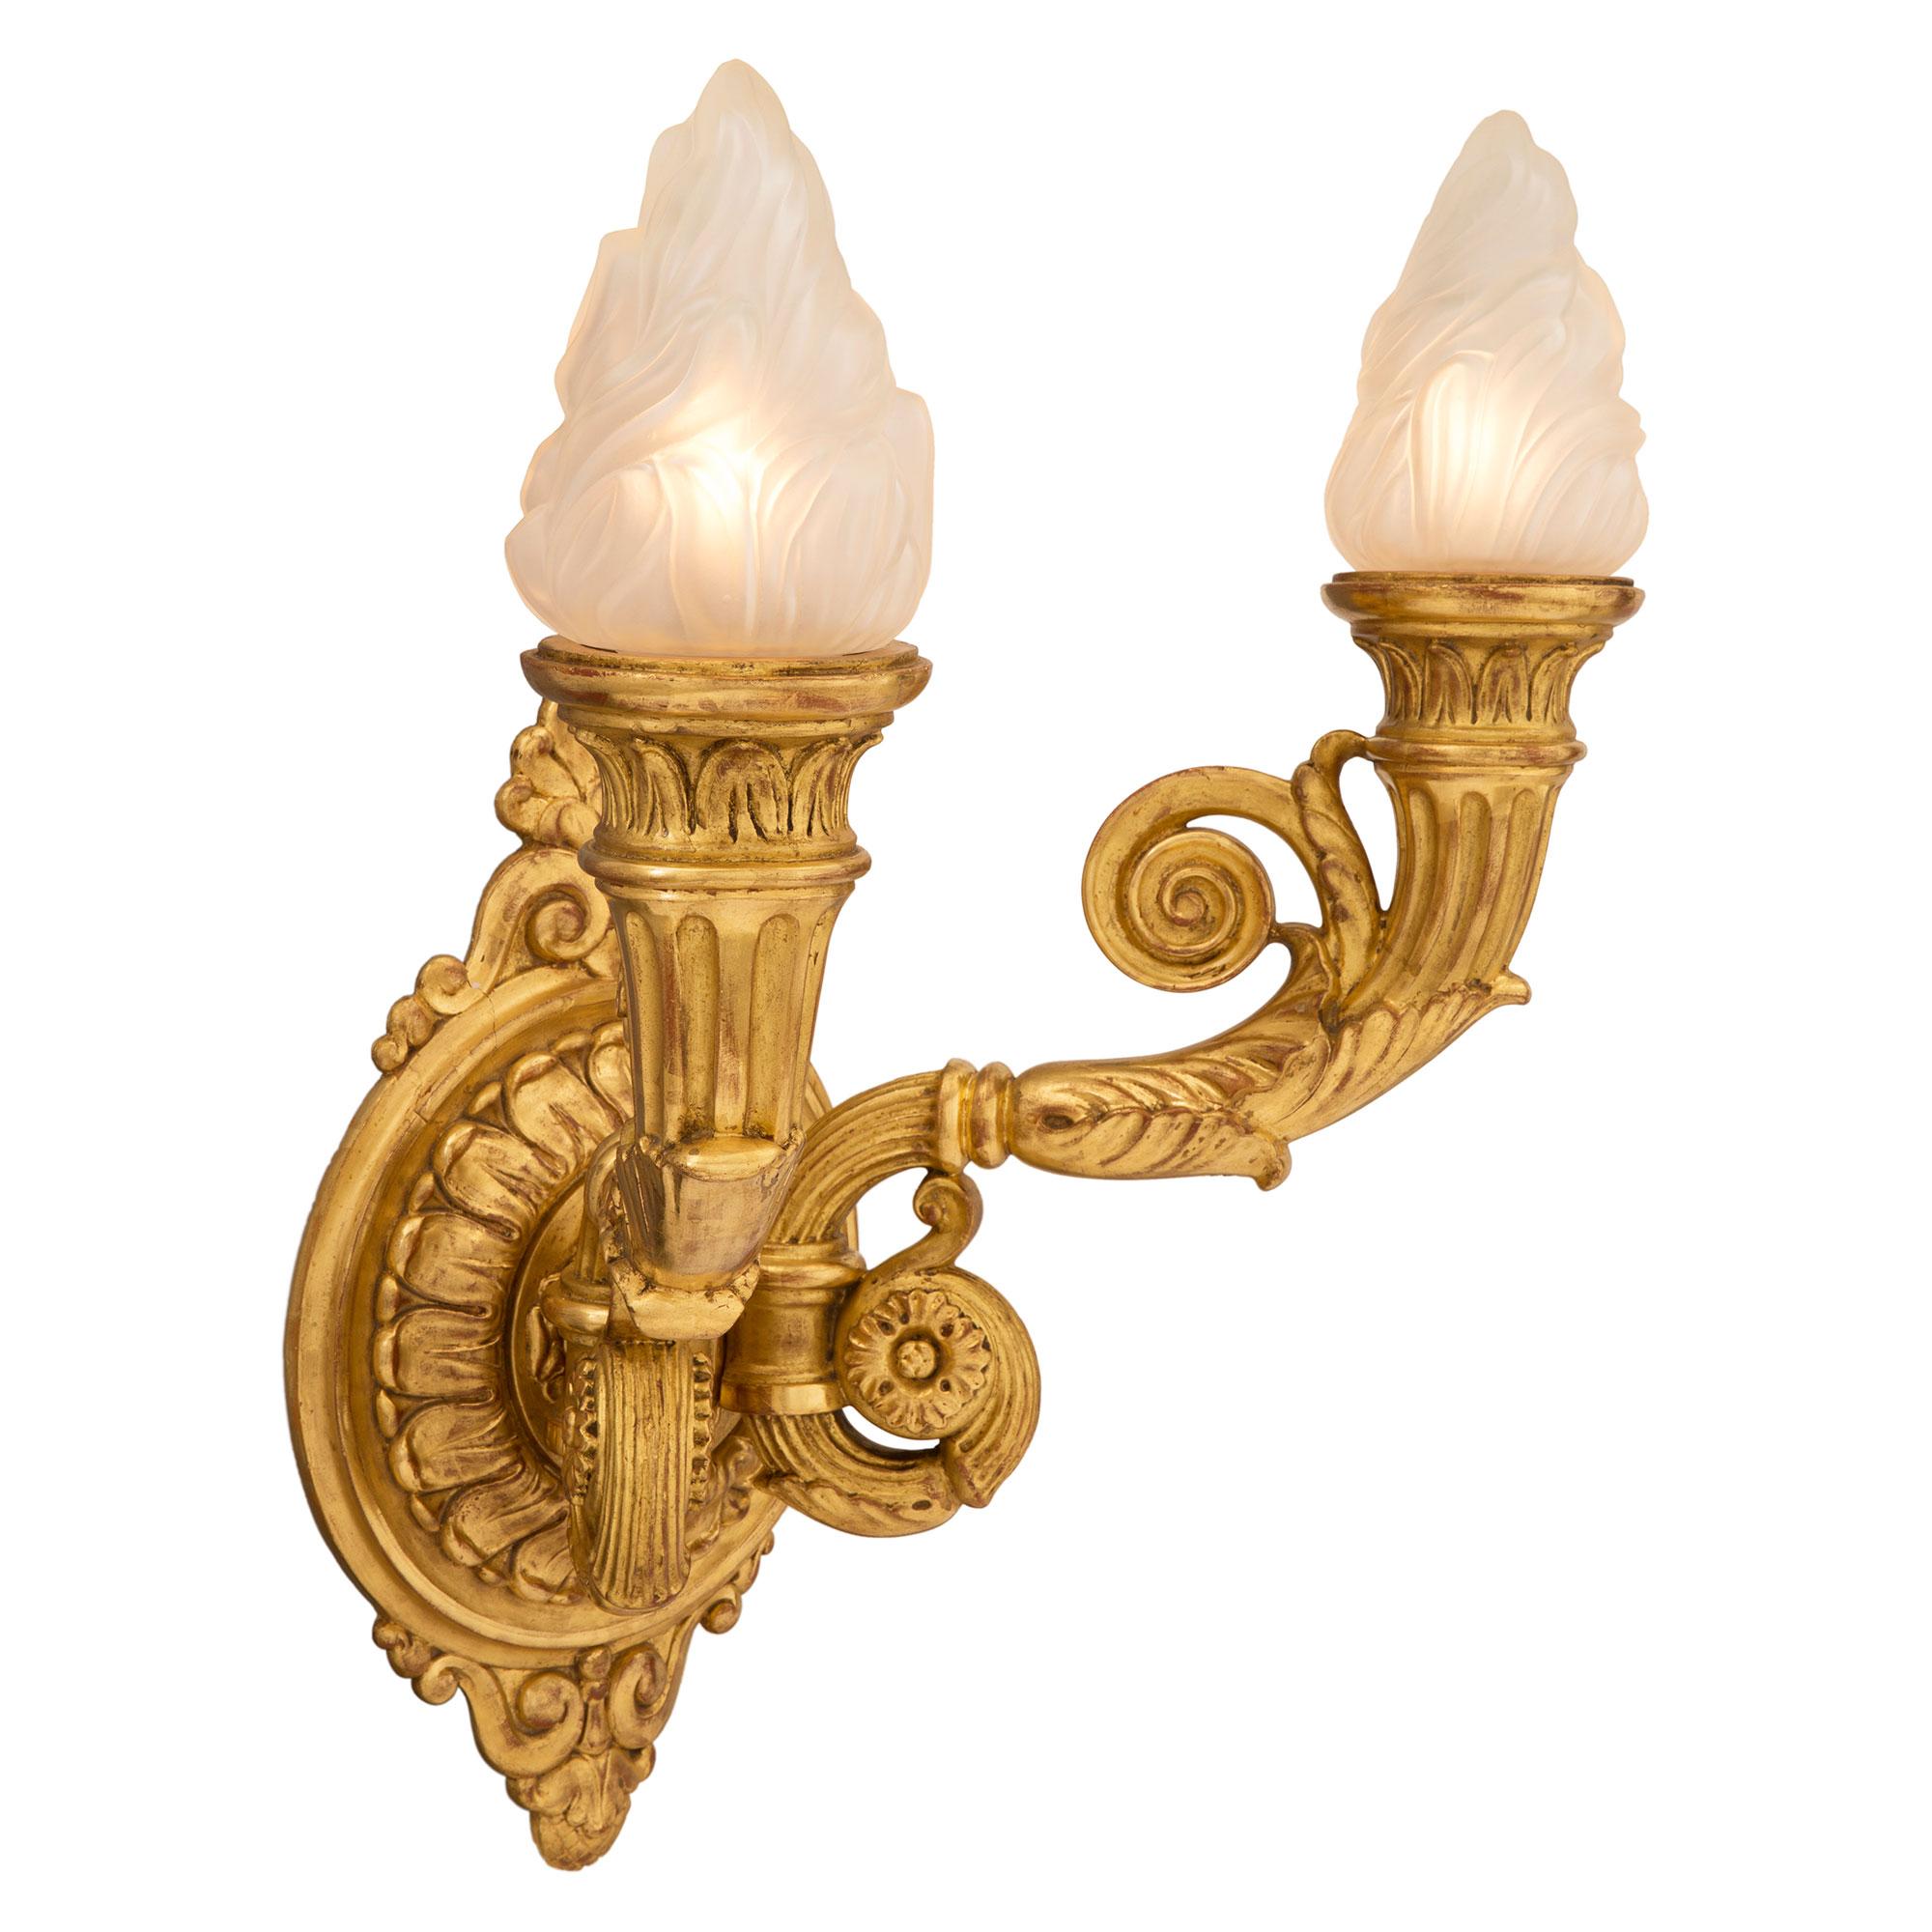 An impressive and large scale pair of Italian 19th century neoclassical St. giltwood Bras de Lumiere sconces. Each two-arm sconce is centered by a striking richly carved backplate with most decorative foliate designs, scrolled movements at the